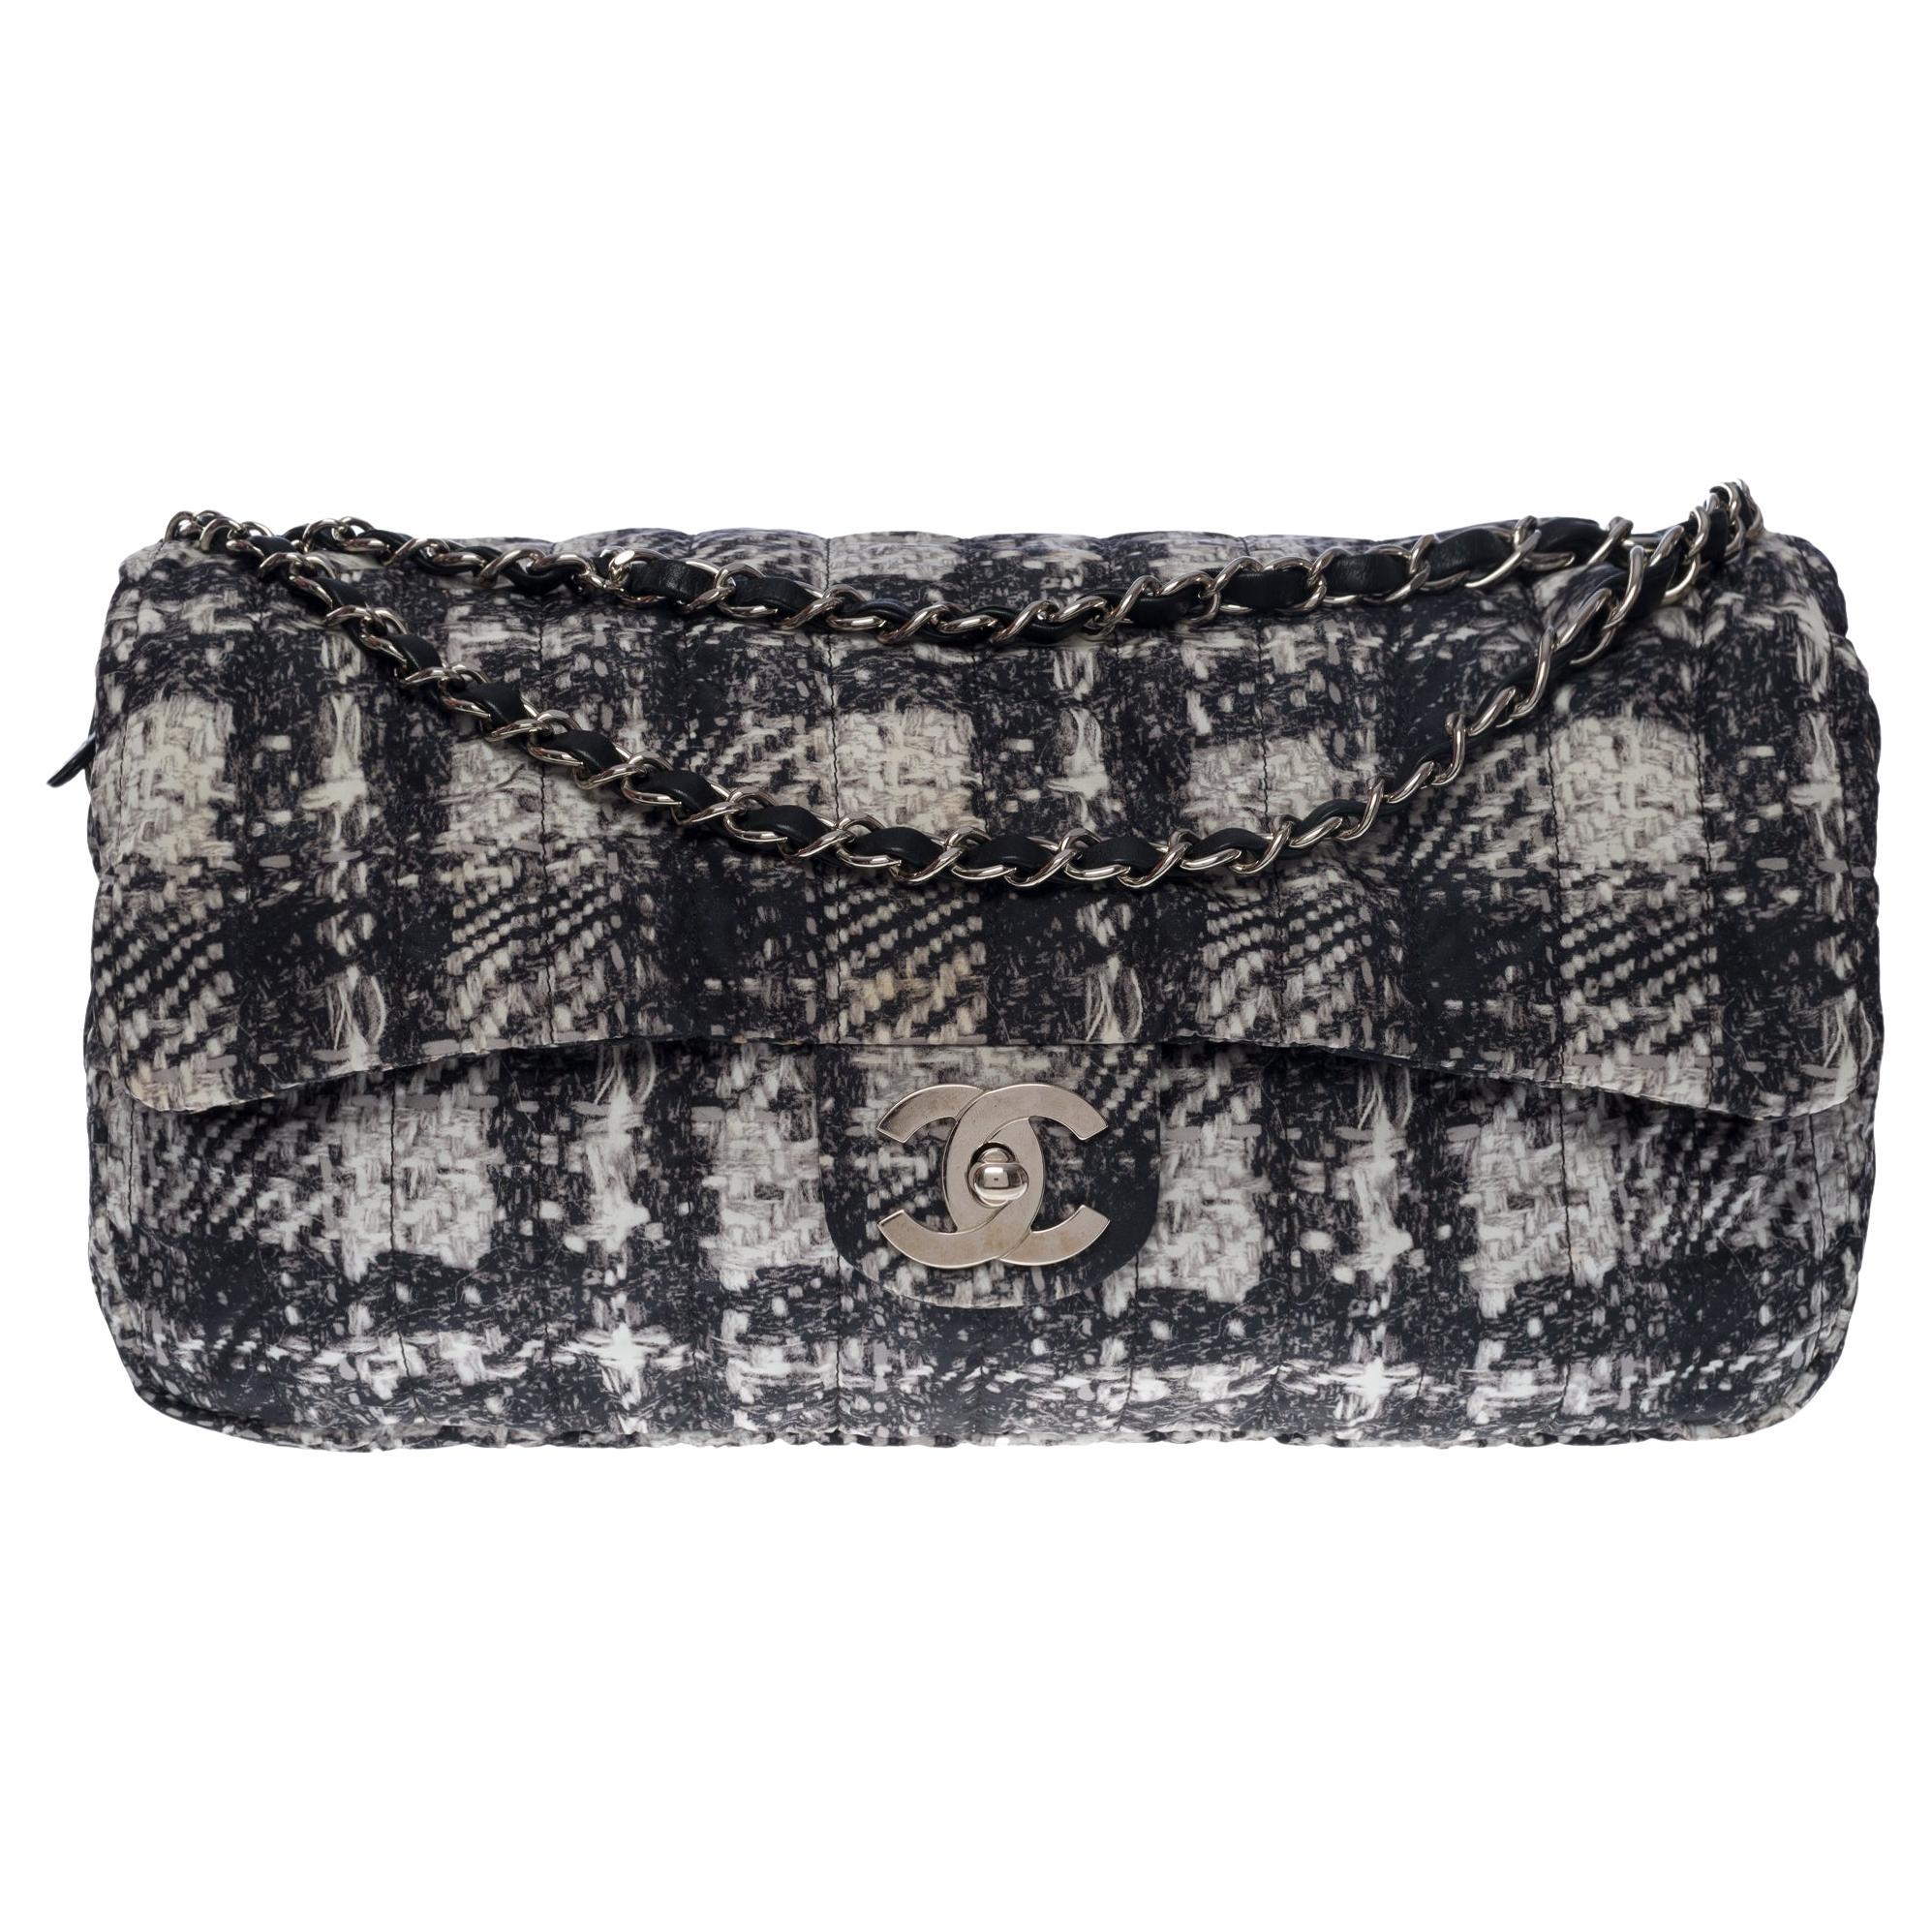 Chanel Timeless shoulder bag in soft synthetic printed tweed black/white, SHW For Sale